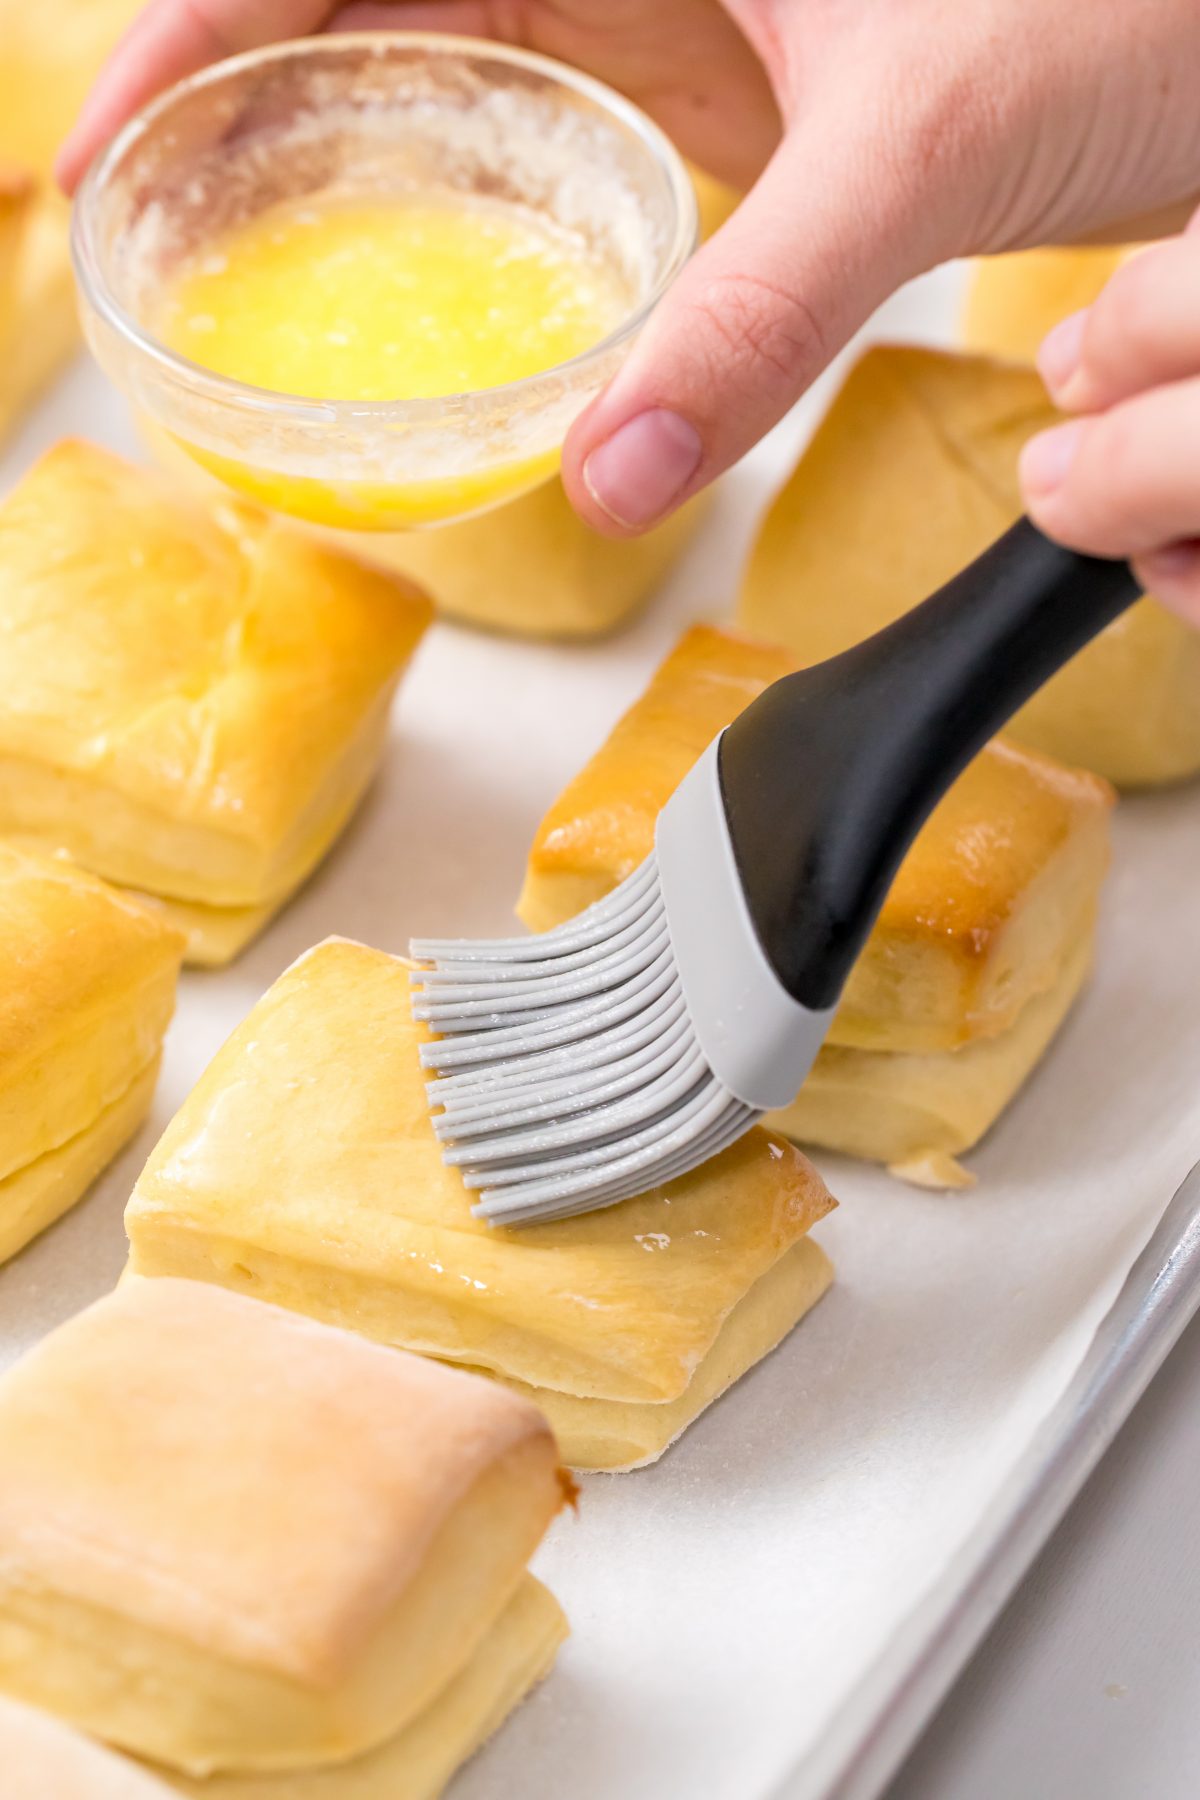 Brush the baked rolls with butter